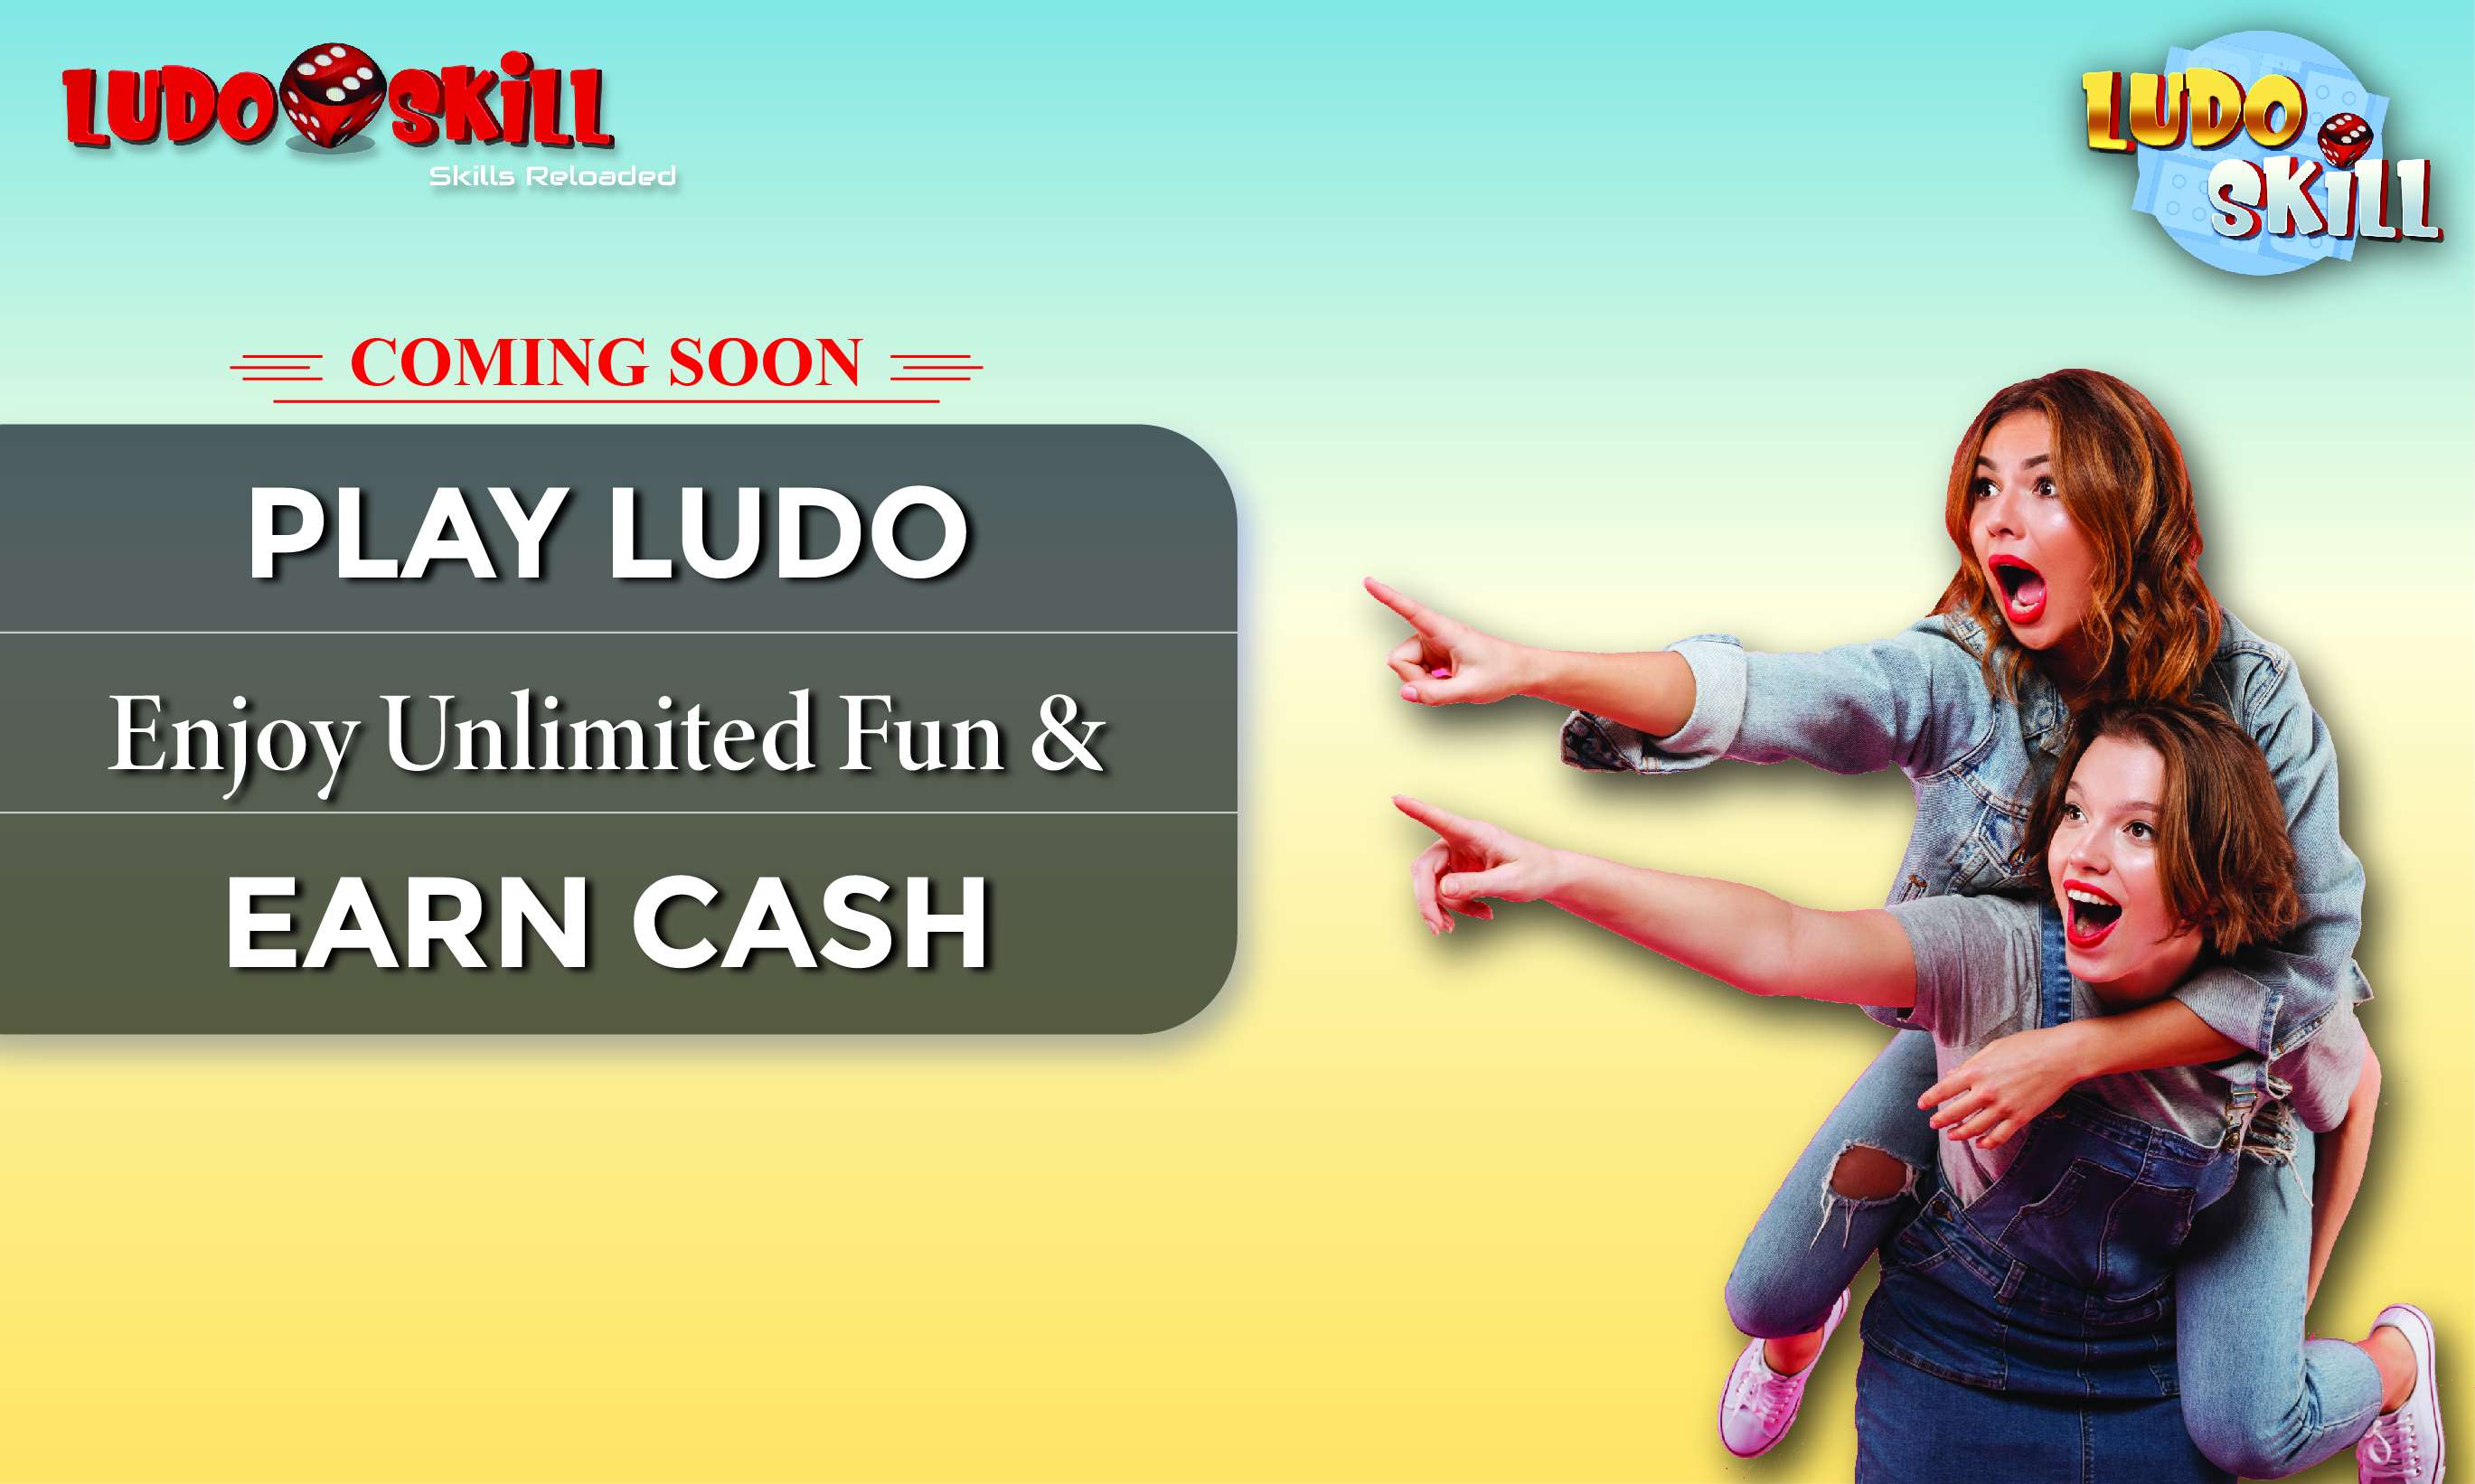 3 REASONS TO ENJOY THE ULTIMATE LUDO FUN AND EARN CASH